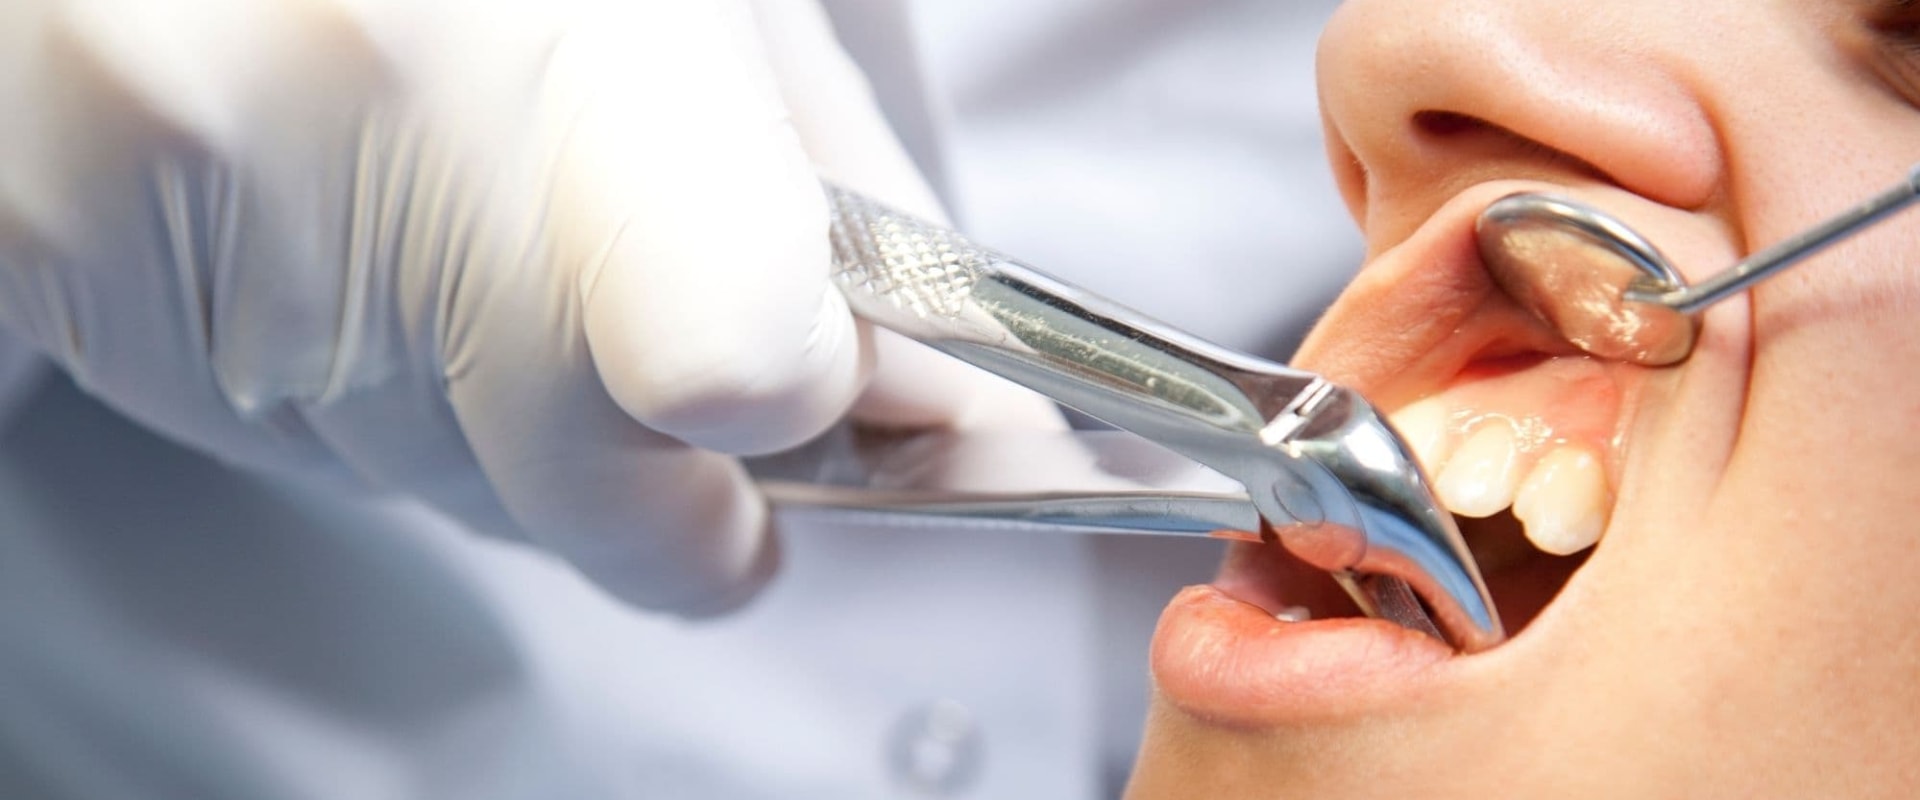 Can an endodontist perform an extraction?